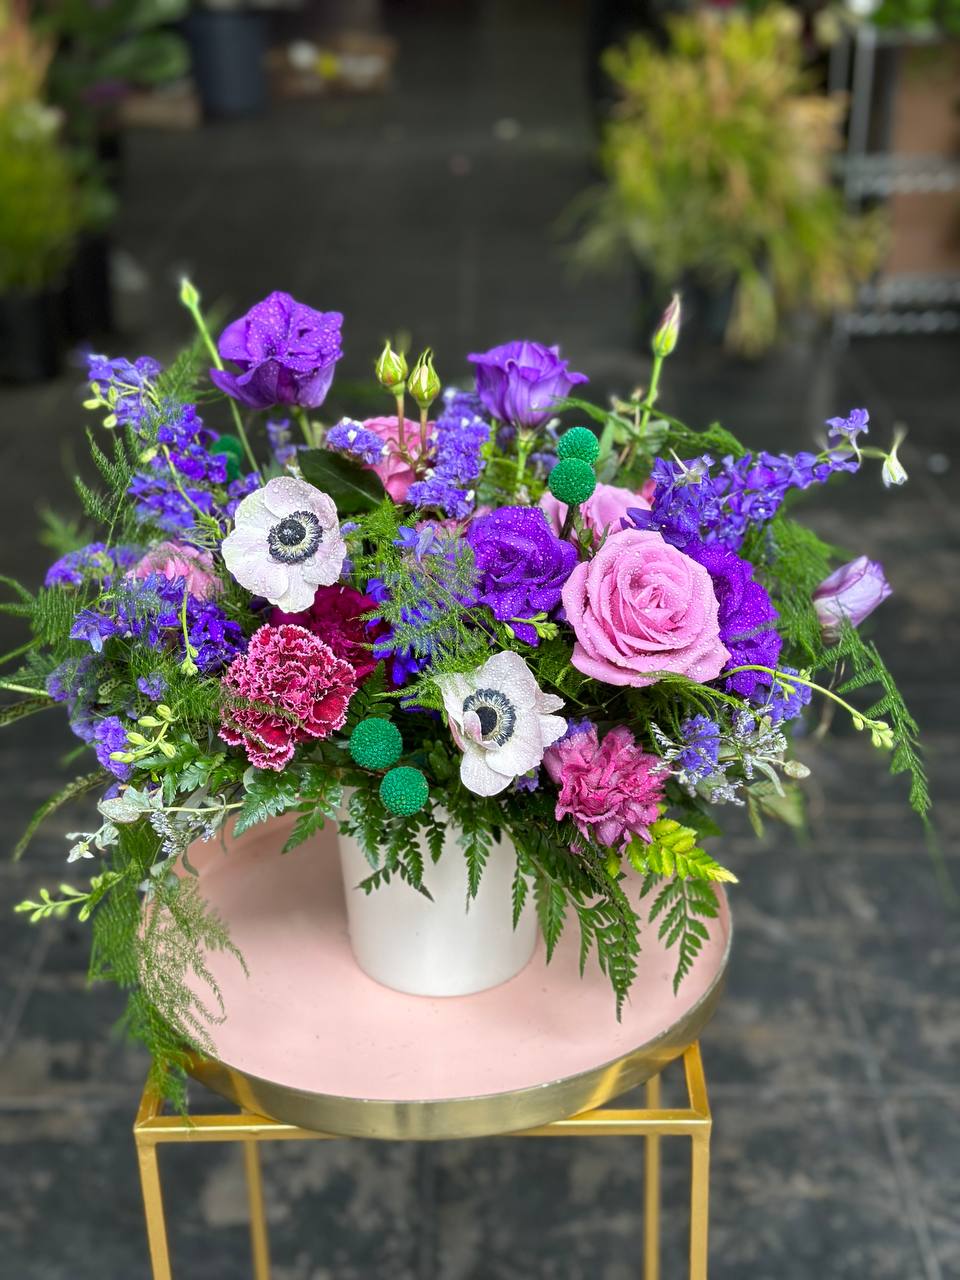 Petite yet stunning flower arrangement that could be both a floral gift